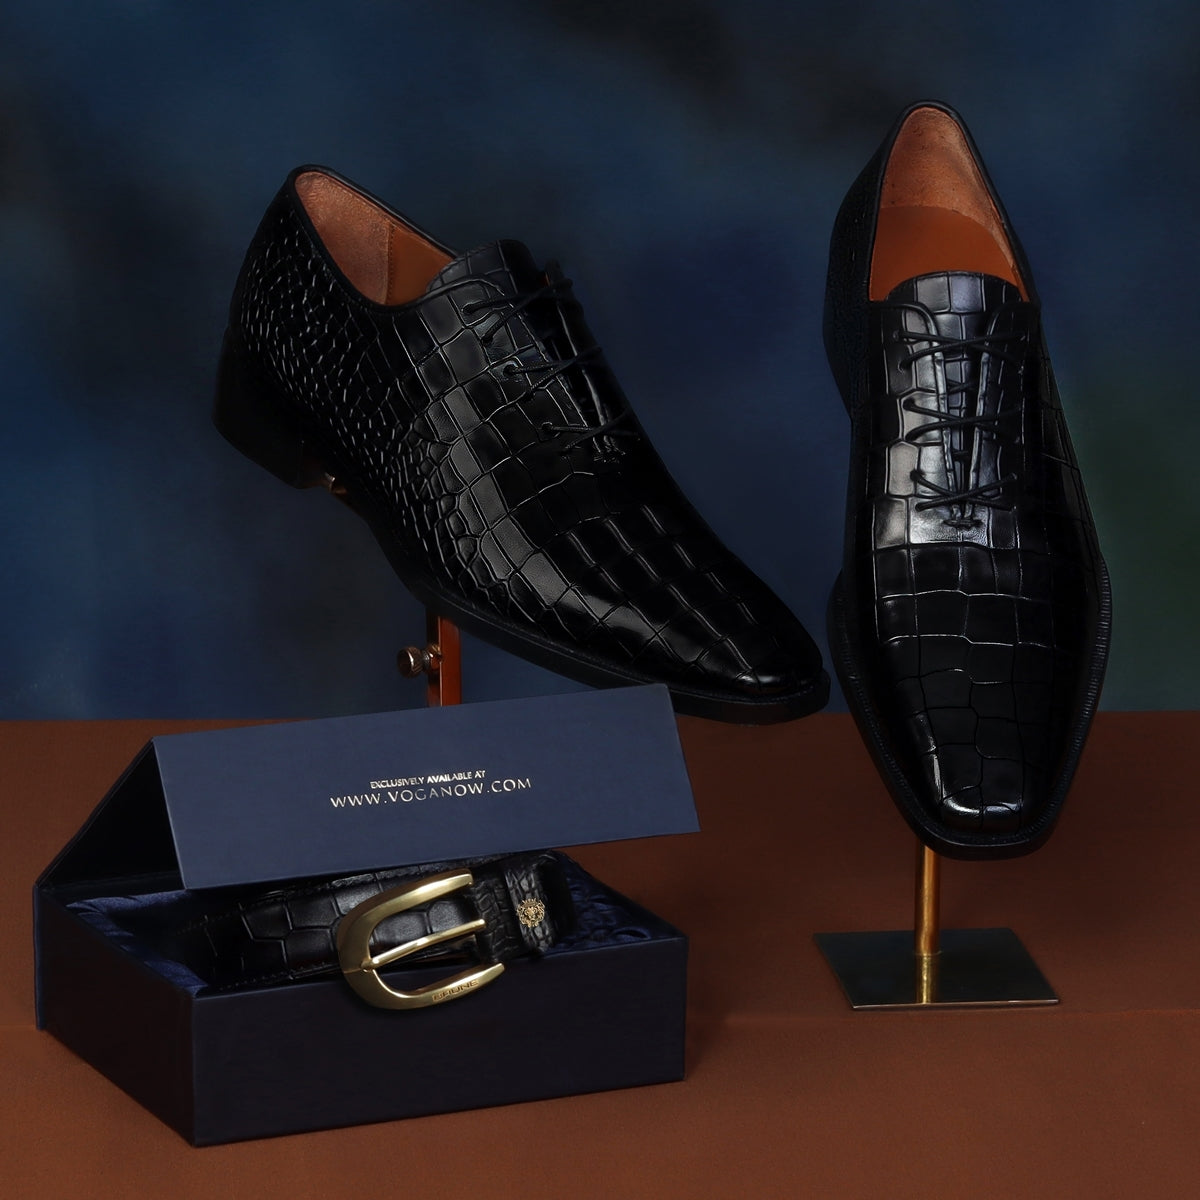 Specially Crafted Combo For T-20 World Cup Team India's Formal Attire Croco Textured Black Genuine Leather Oxford Lace-up Shoe With New Buckle Belt